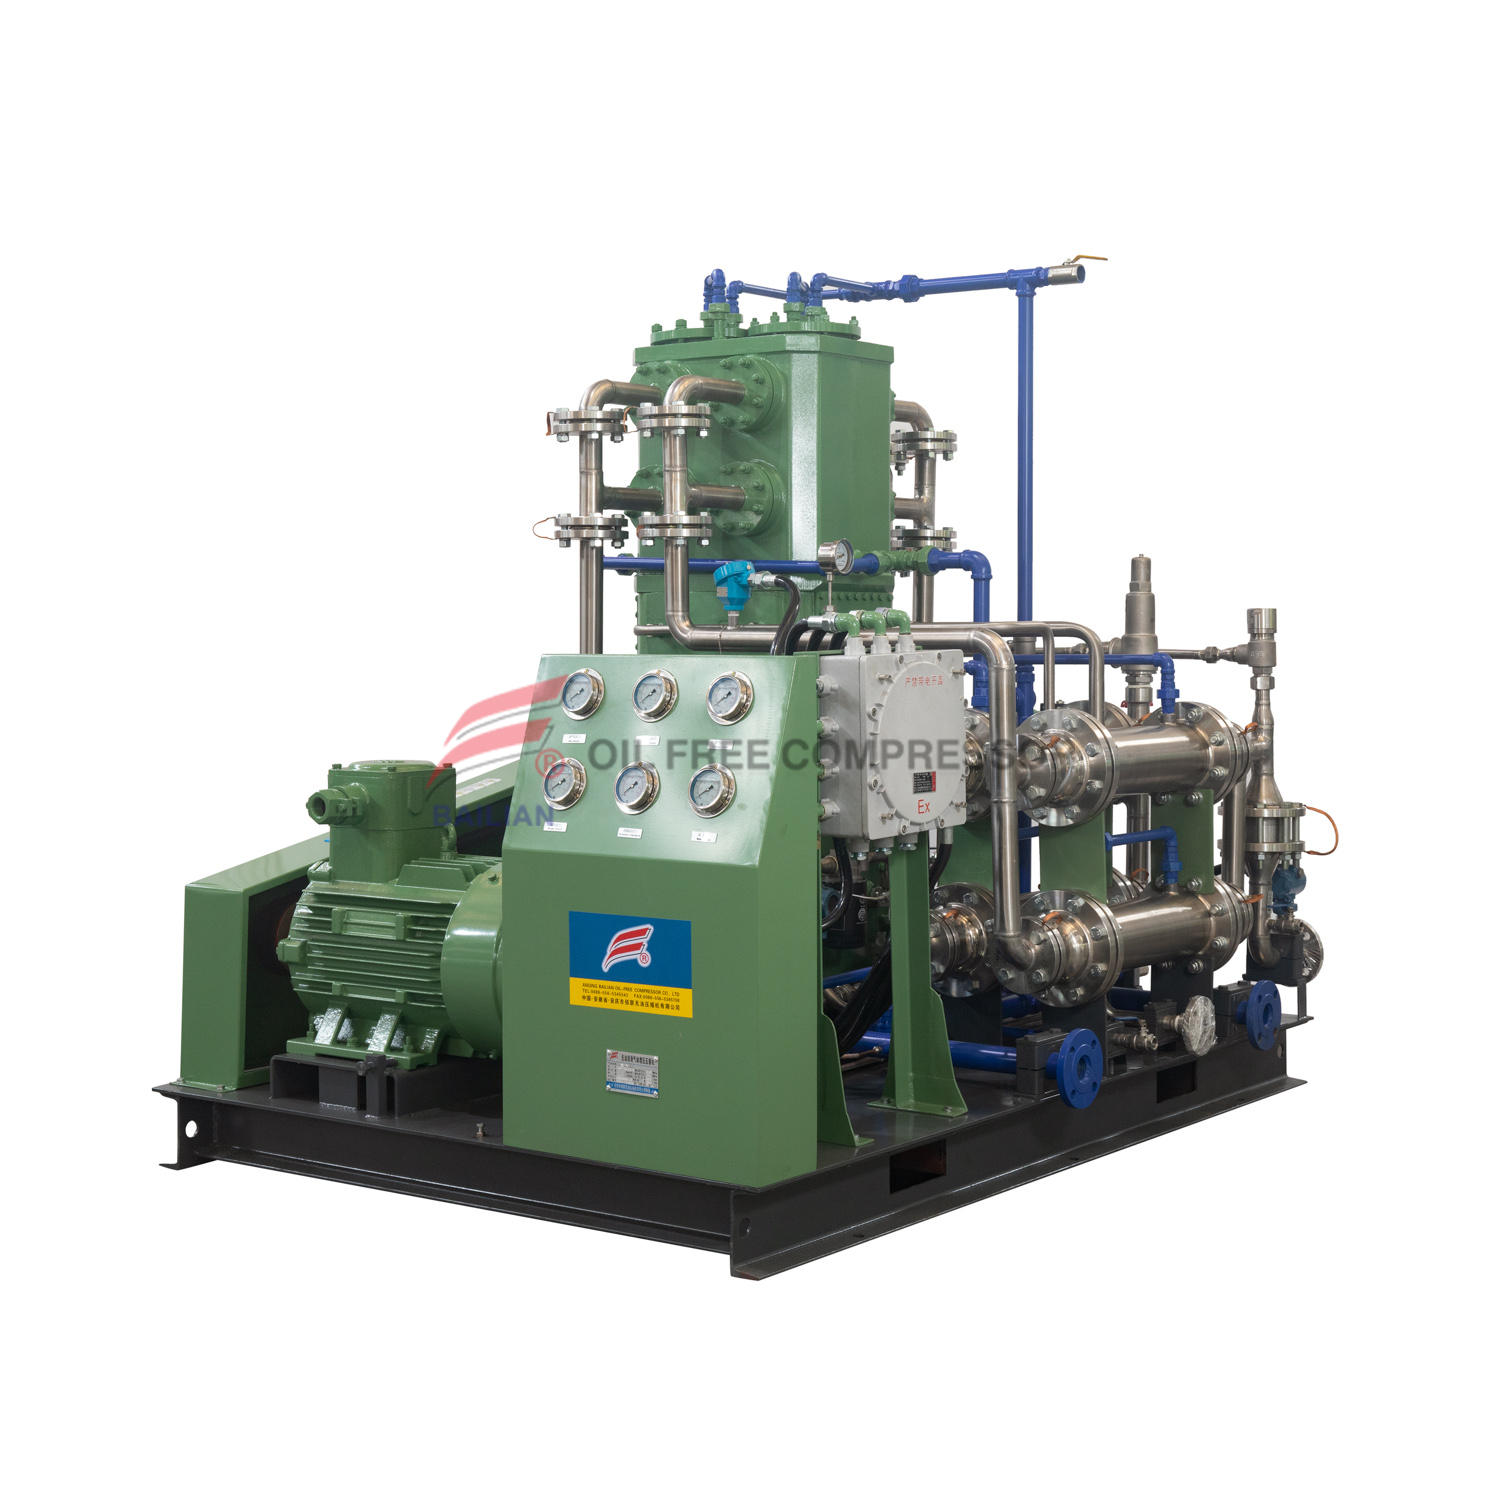 TZWH-240/10-23 Vertical oil-free pry mounted type H2 Compressor